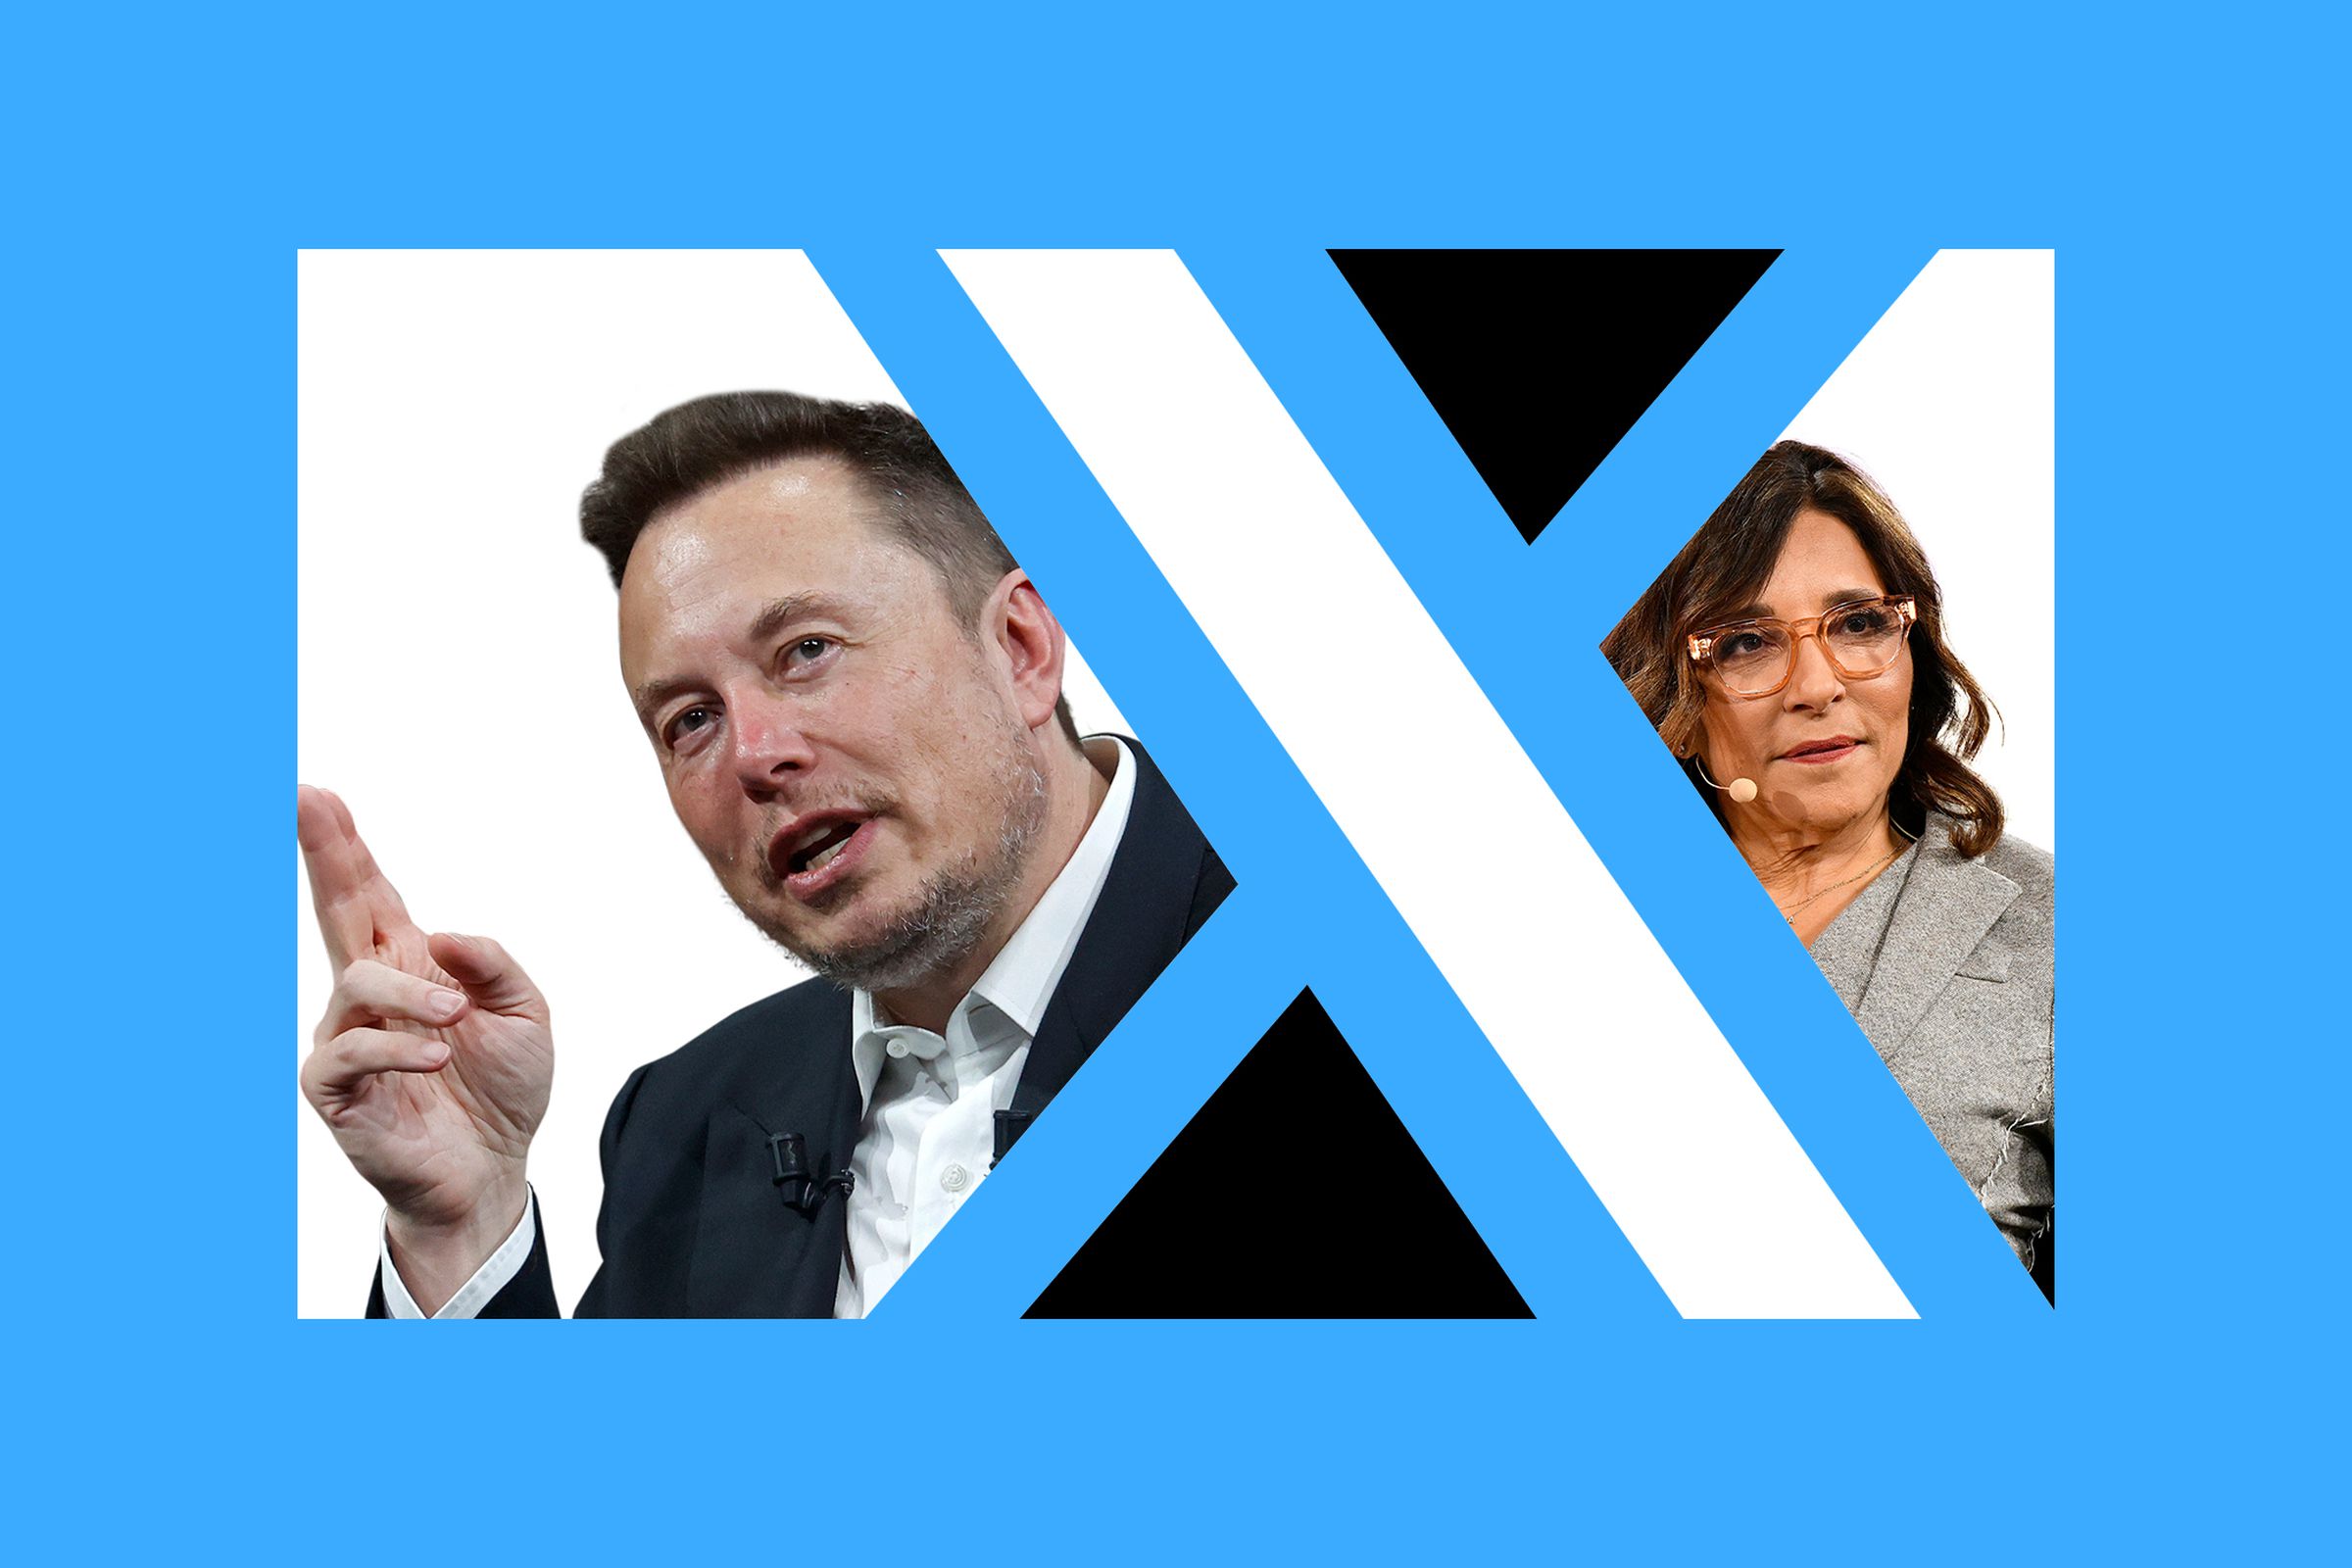 Graphic photo illustration of Elon Musk and Linda Yaccarino in the negative space around the X logo.